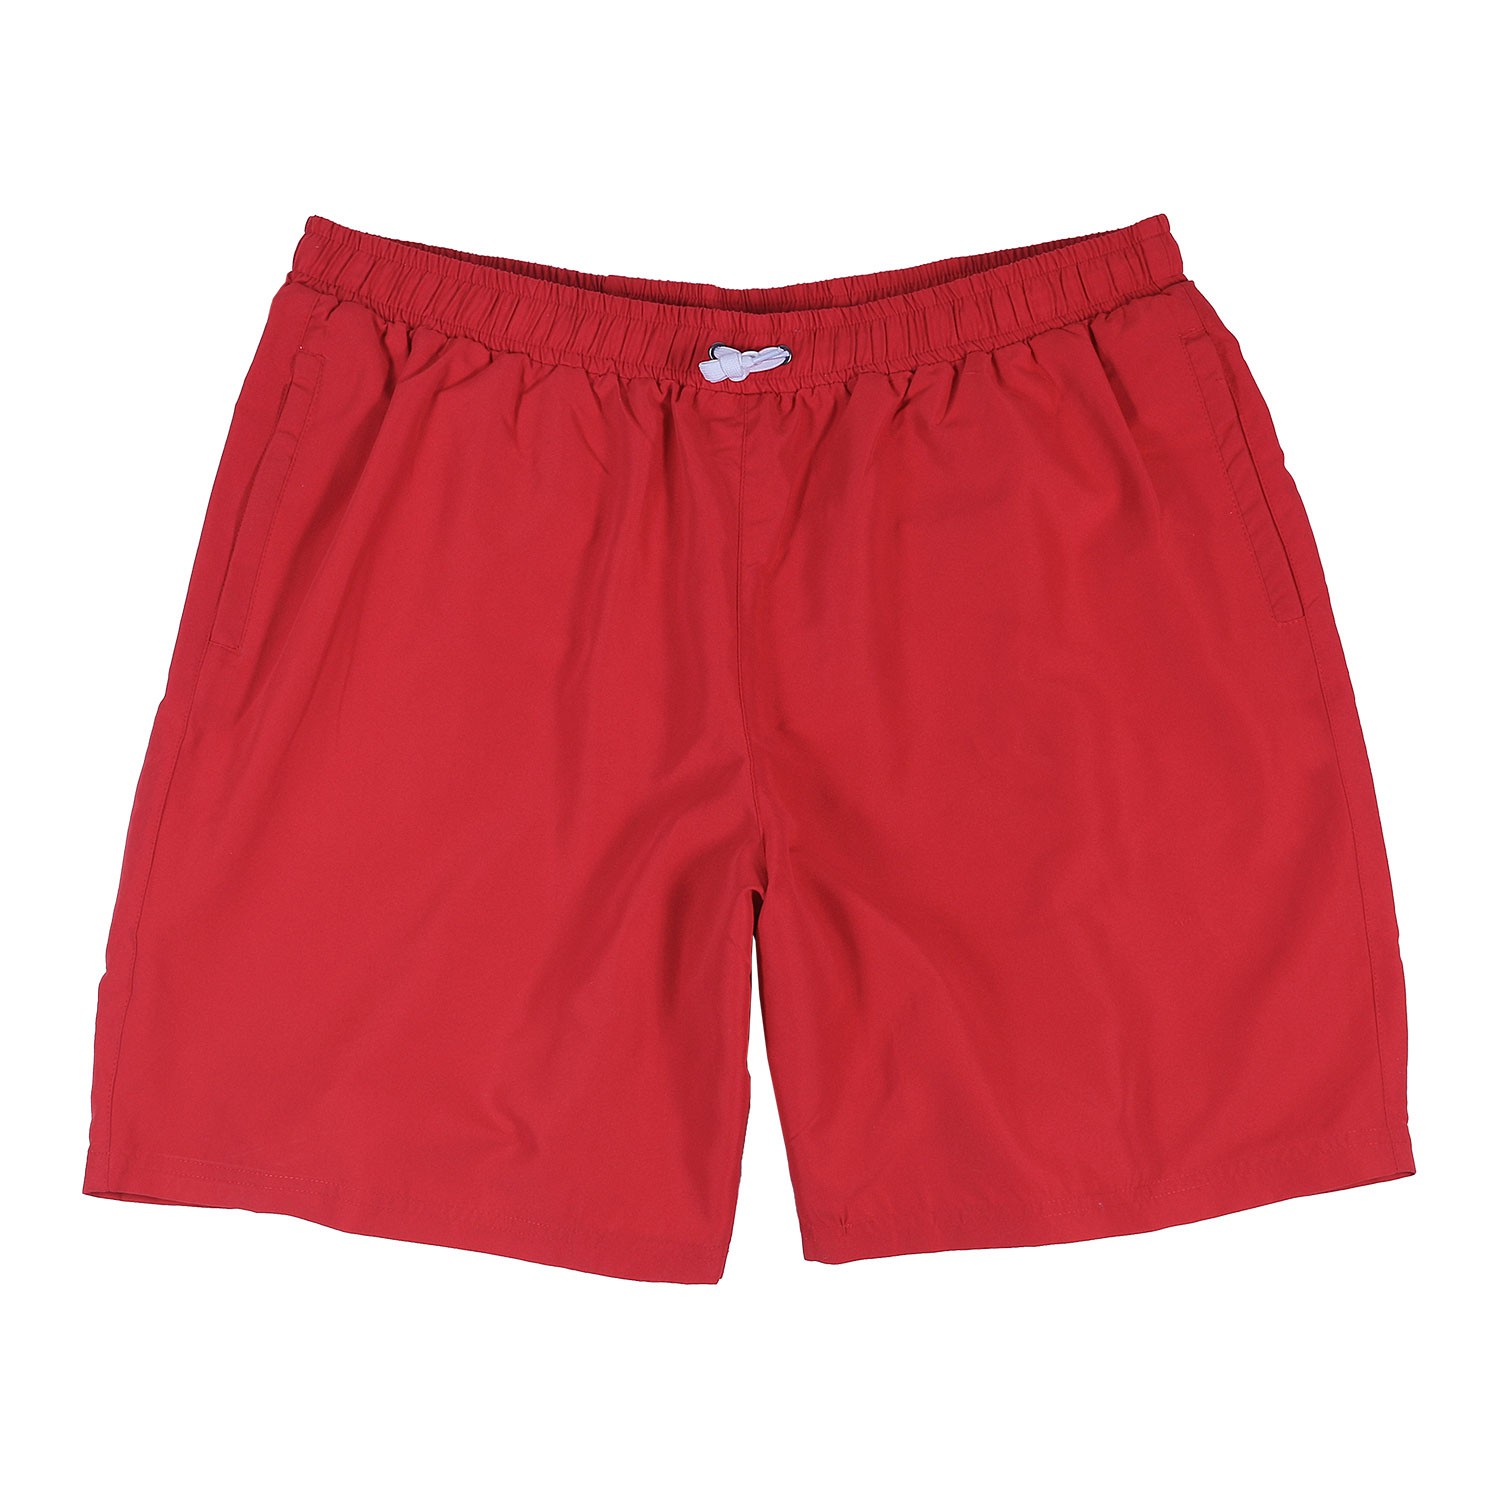 Swimming trunks in red up to oversize 10XL- Abraxas